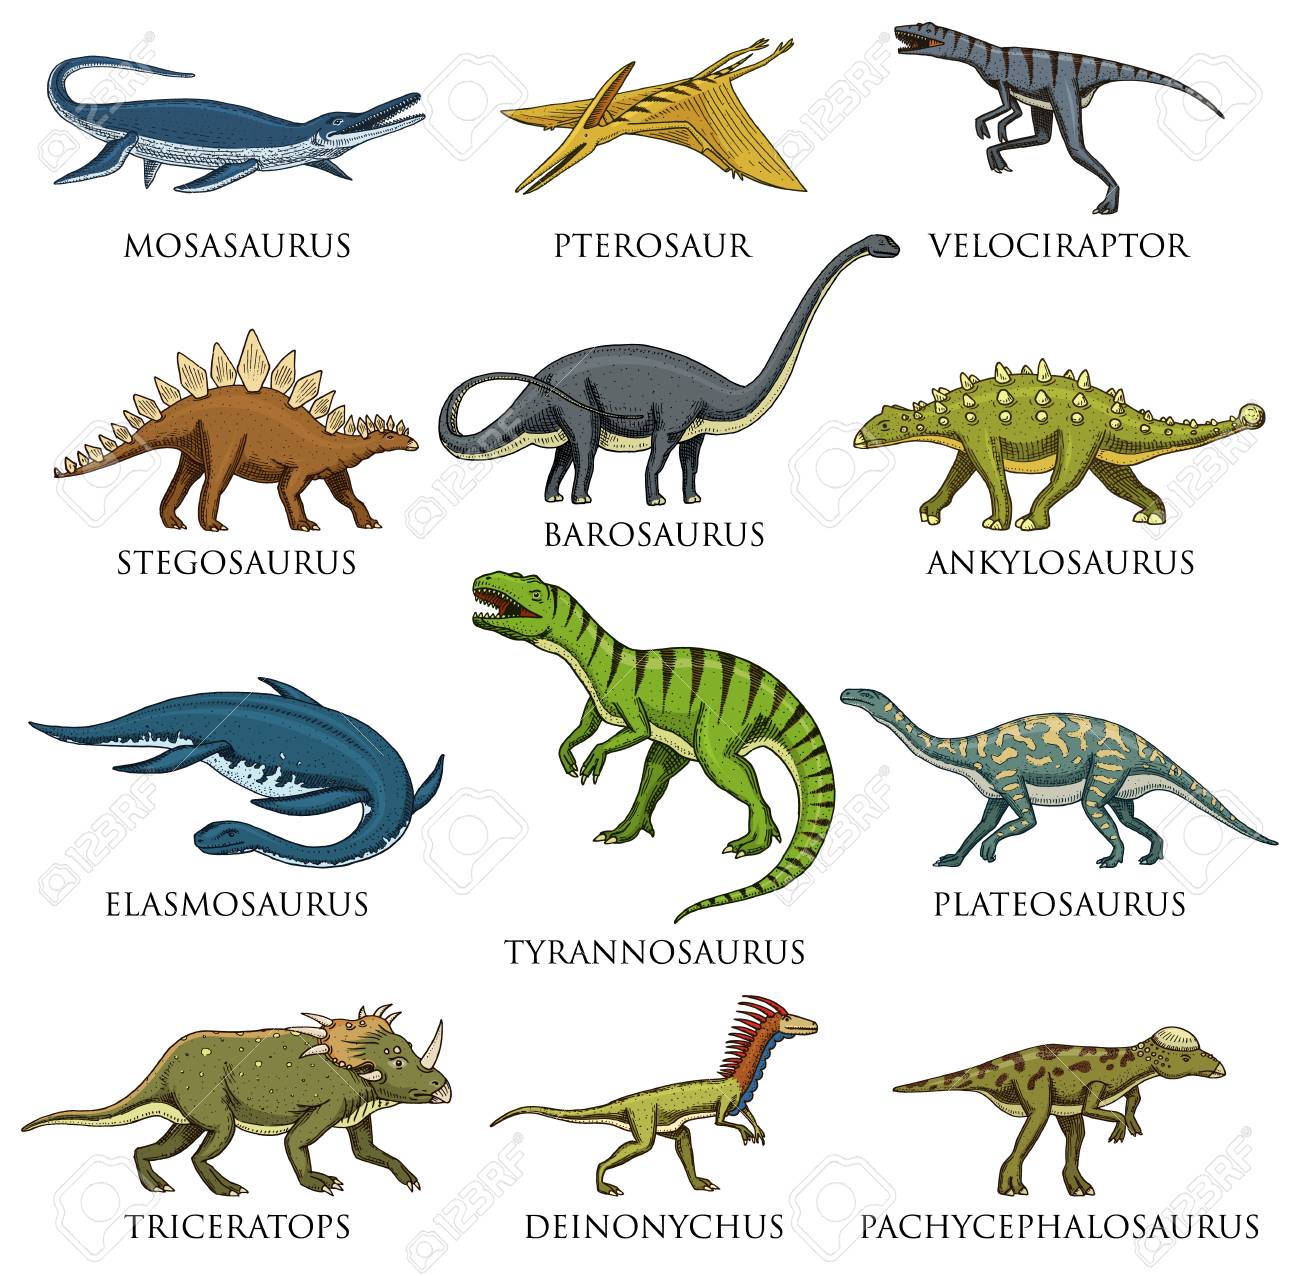 Detail Different Dinosaurs Images Nomer 15